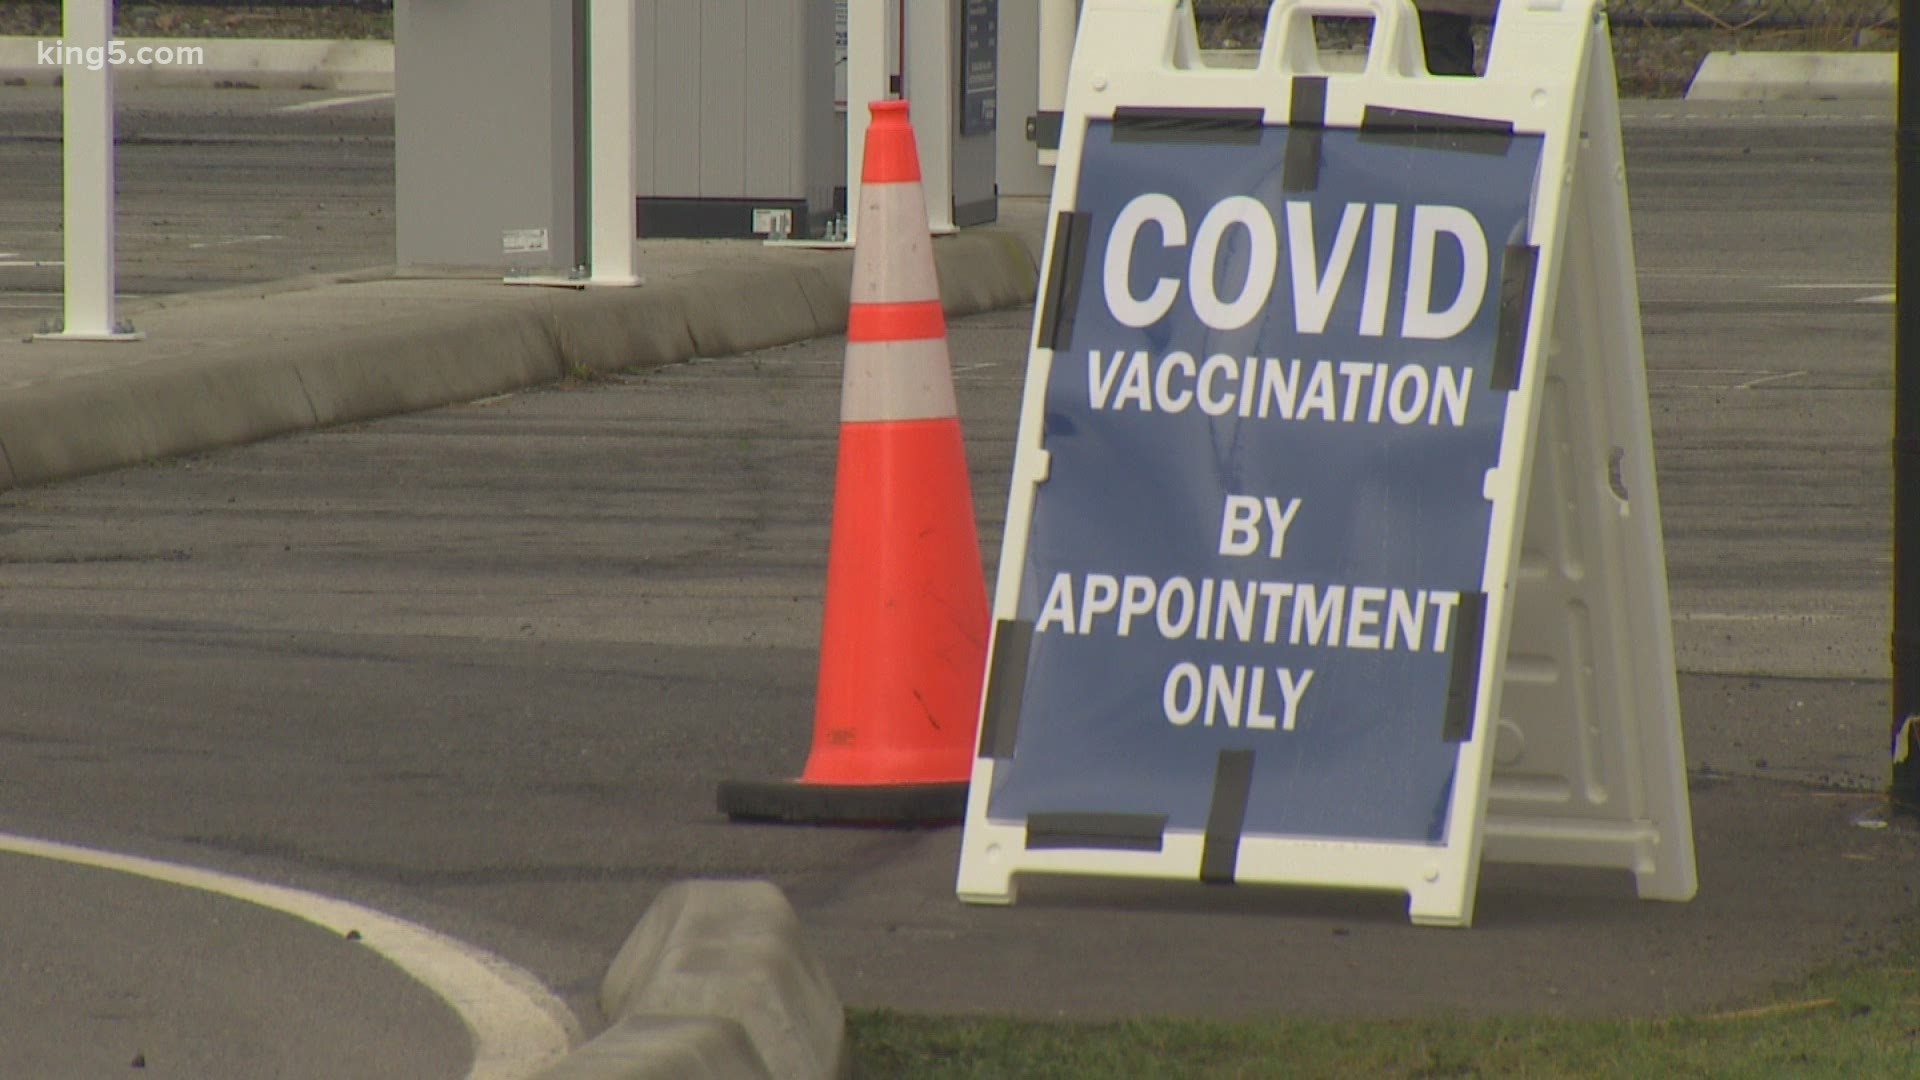 While COVID-19 vaccine doses are lagging in Washington state, many residents are languishing.